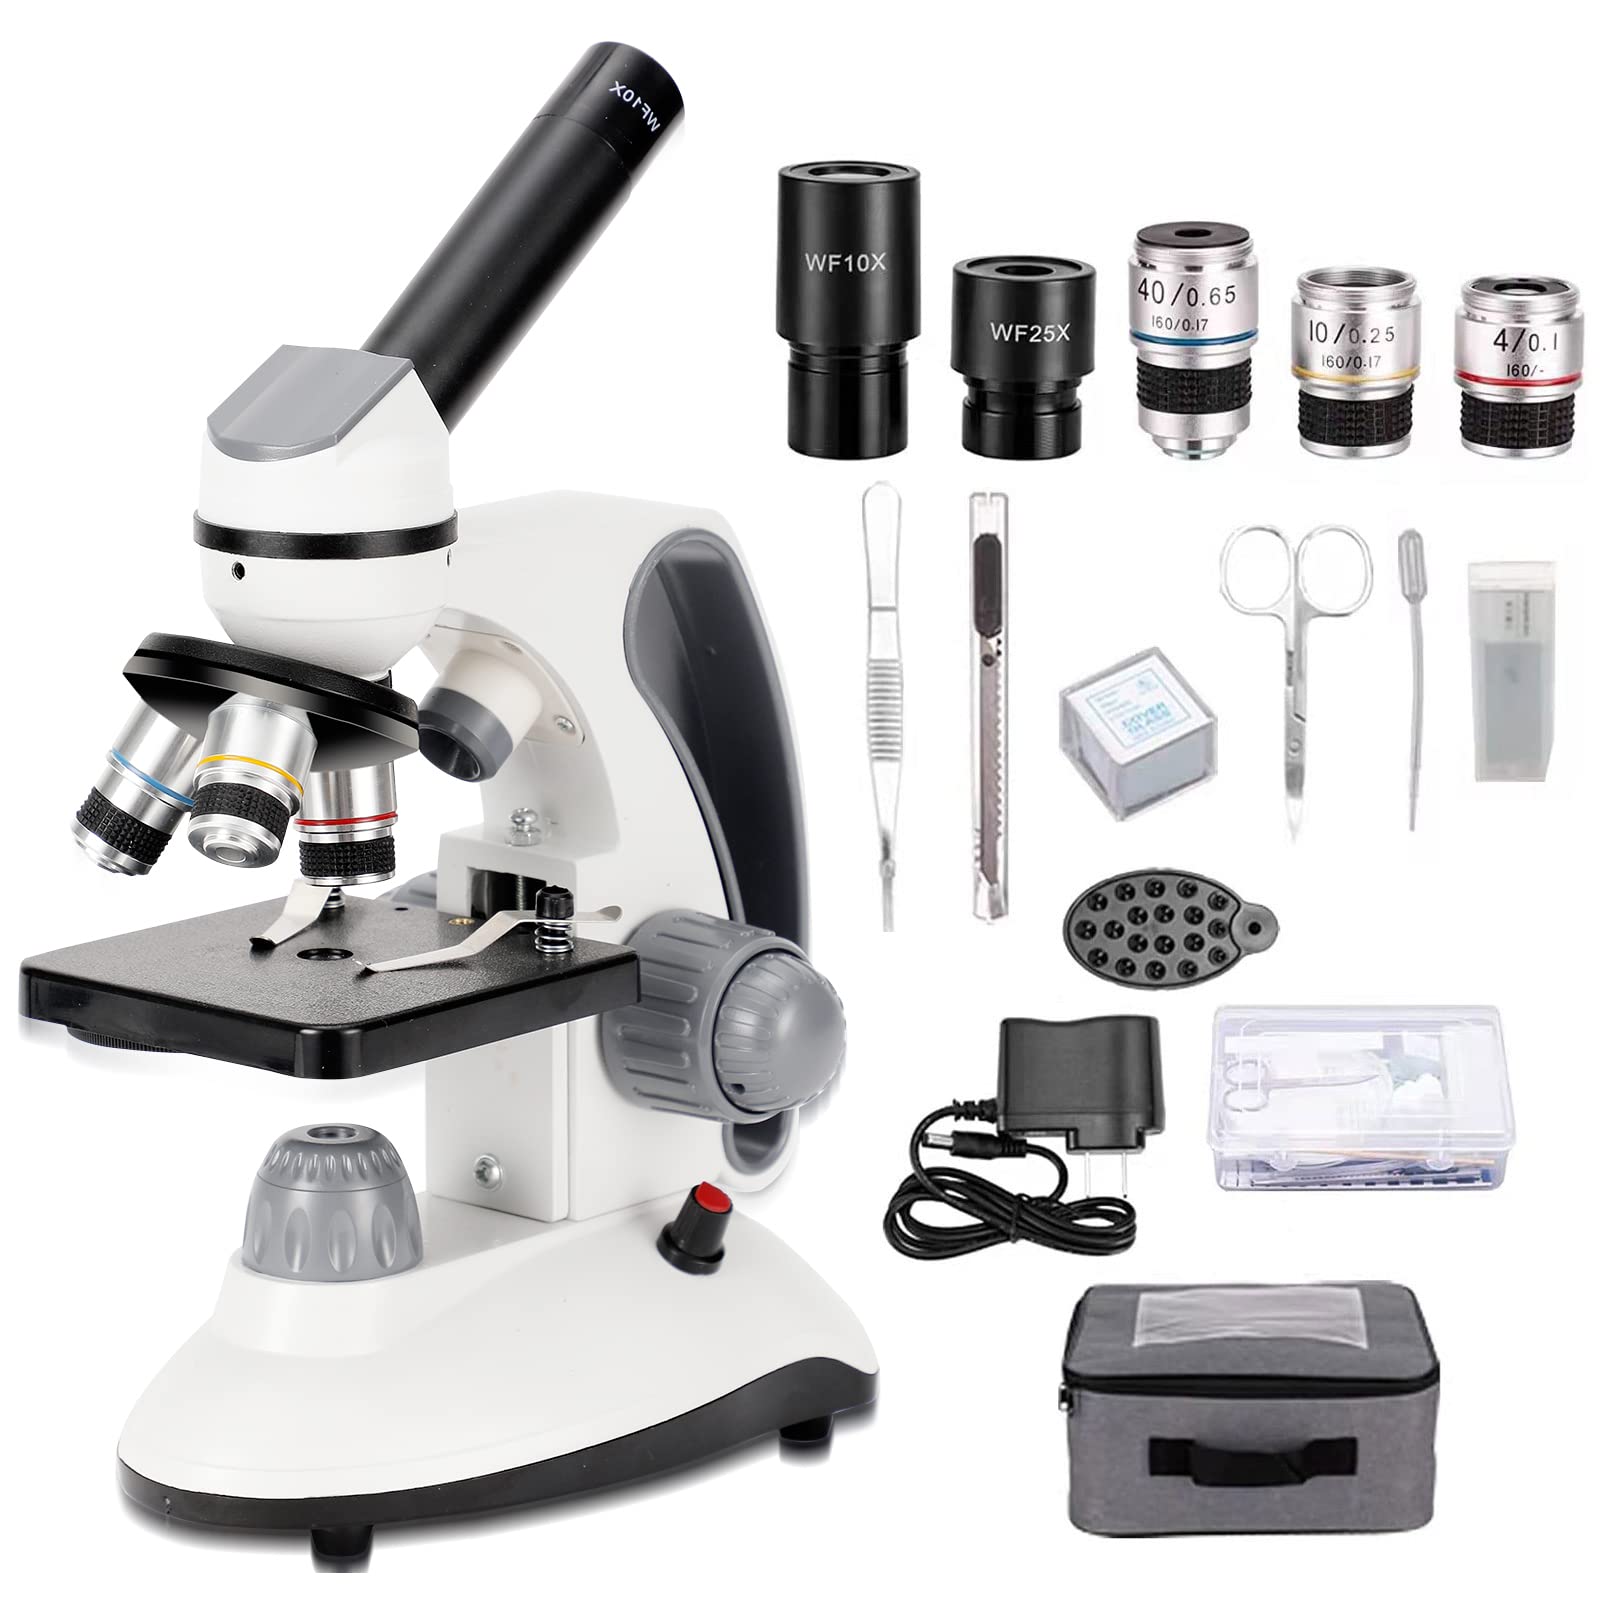 100X-2000X Microscopes for Kids Students Adult,with Microscope Slides Set, Phone Adapter, Powerful Biological Microscopes for School Laboratory Home Education